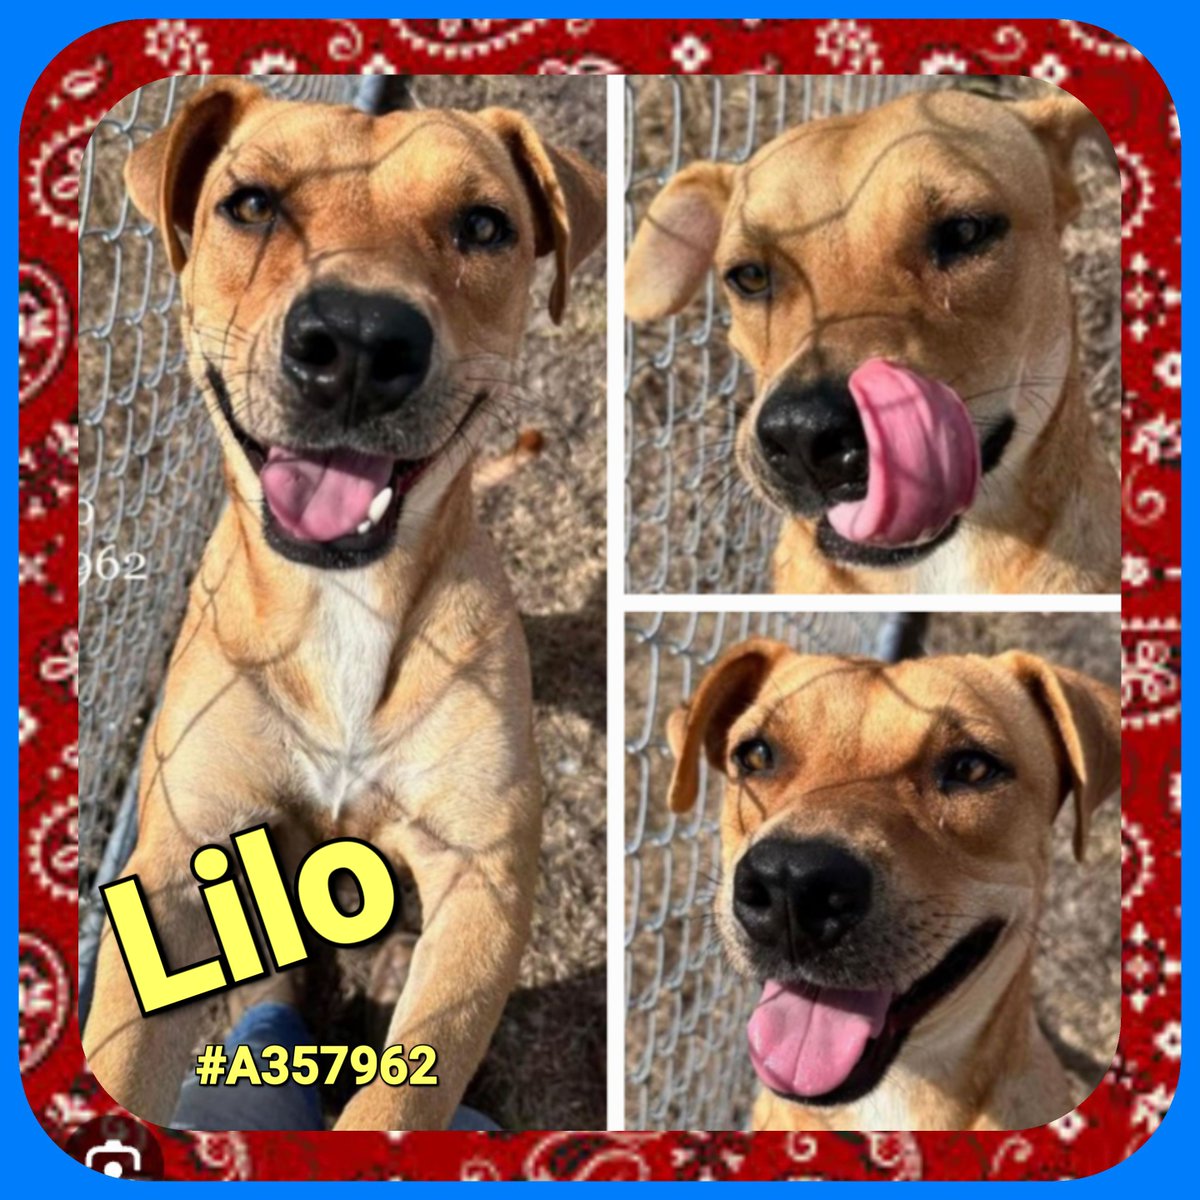 🐕⏰ LILO 🆘#A357962 🚨⏰ 2yo 49lbs Male Black Mouth Cur Mix🥰 Fearful Around Kennel But Once Outside Runs & Plays🐶 Loves Treats & Affection🐕💞 Please PLEDGE 💰 for RESQ 🙏 ADOPTERS FOSTERS Contact👇 CORPUS CHRISTI ANIMAL CARE 📧 ccacsrescues@cctexas.com 📞 361-826-4630